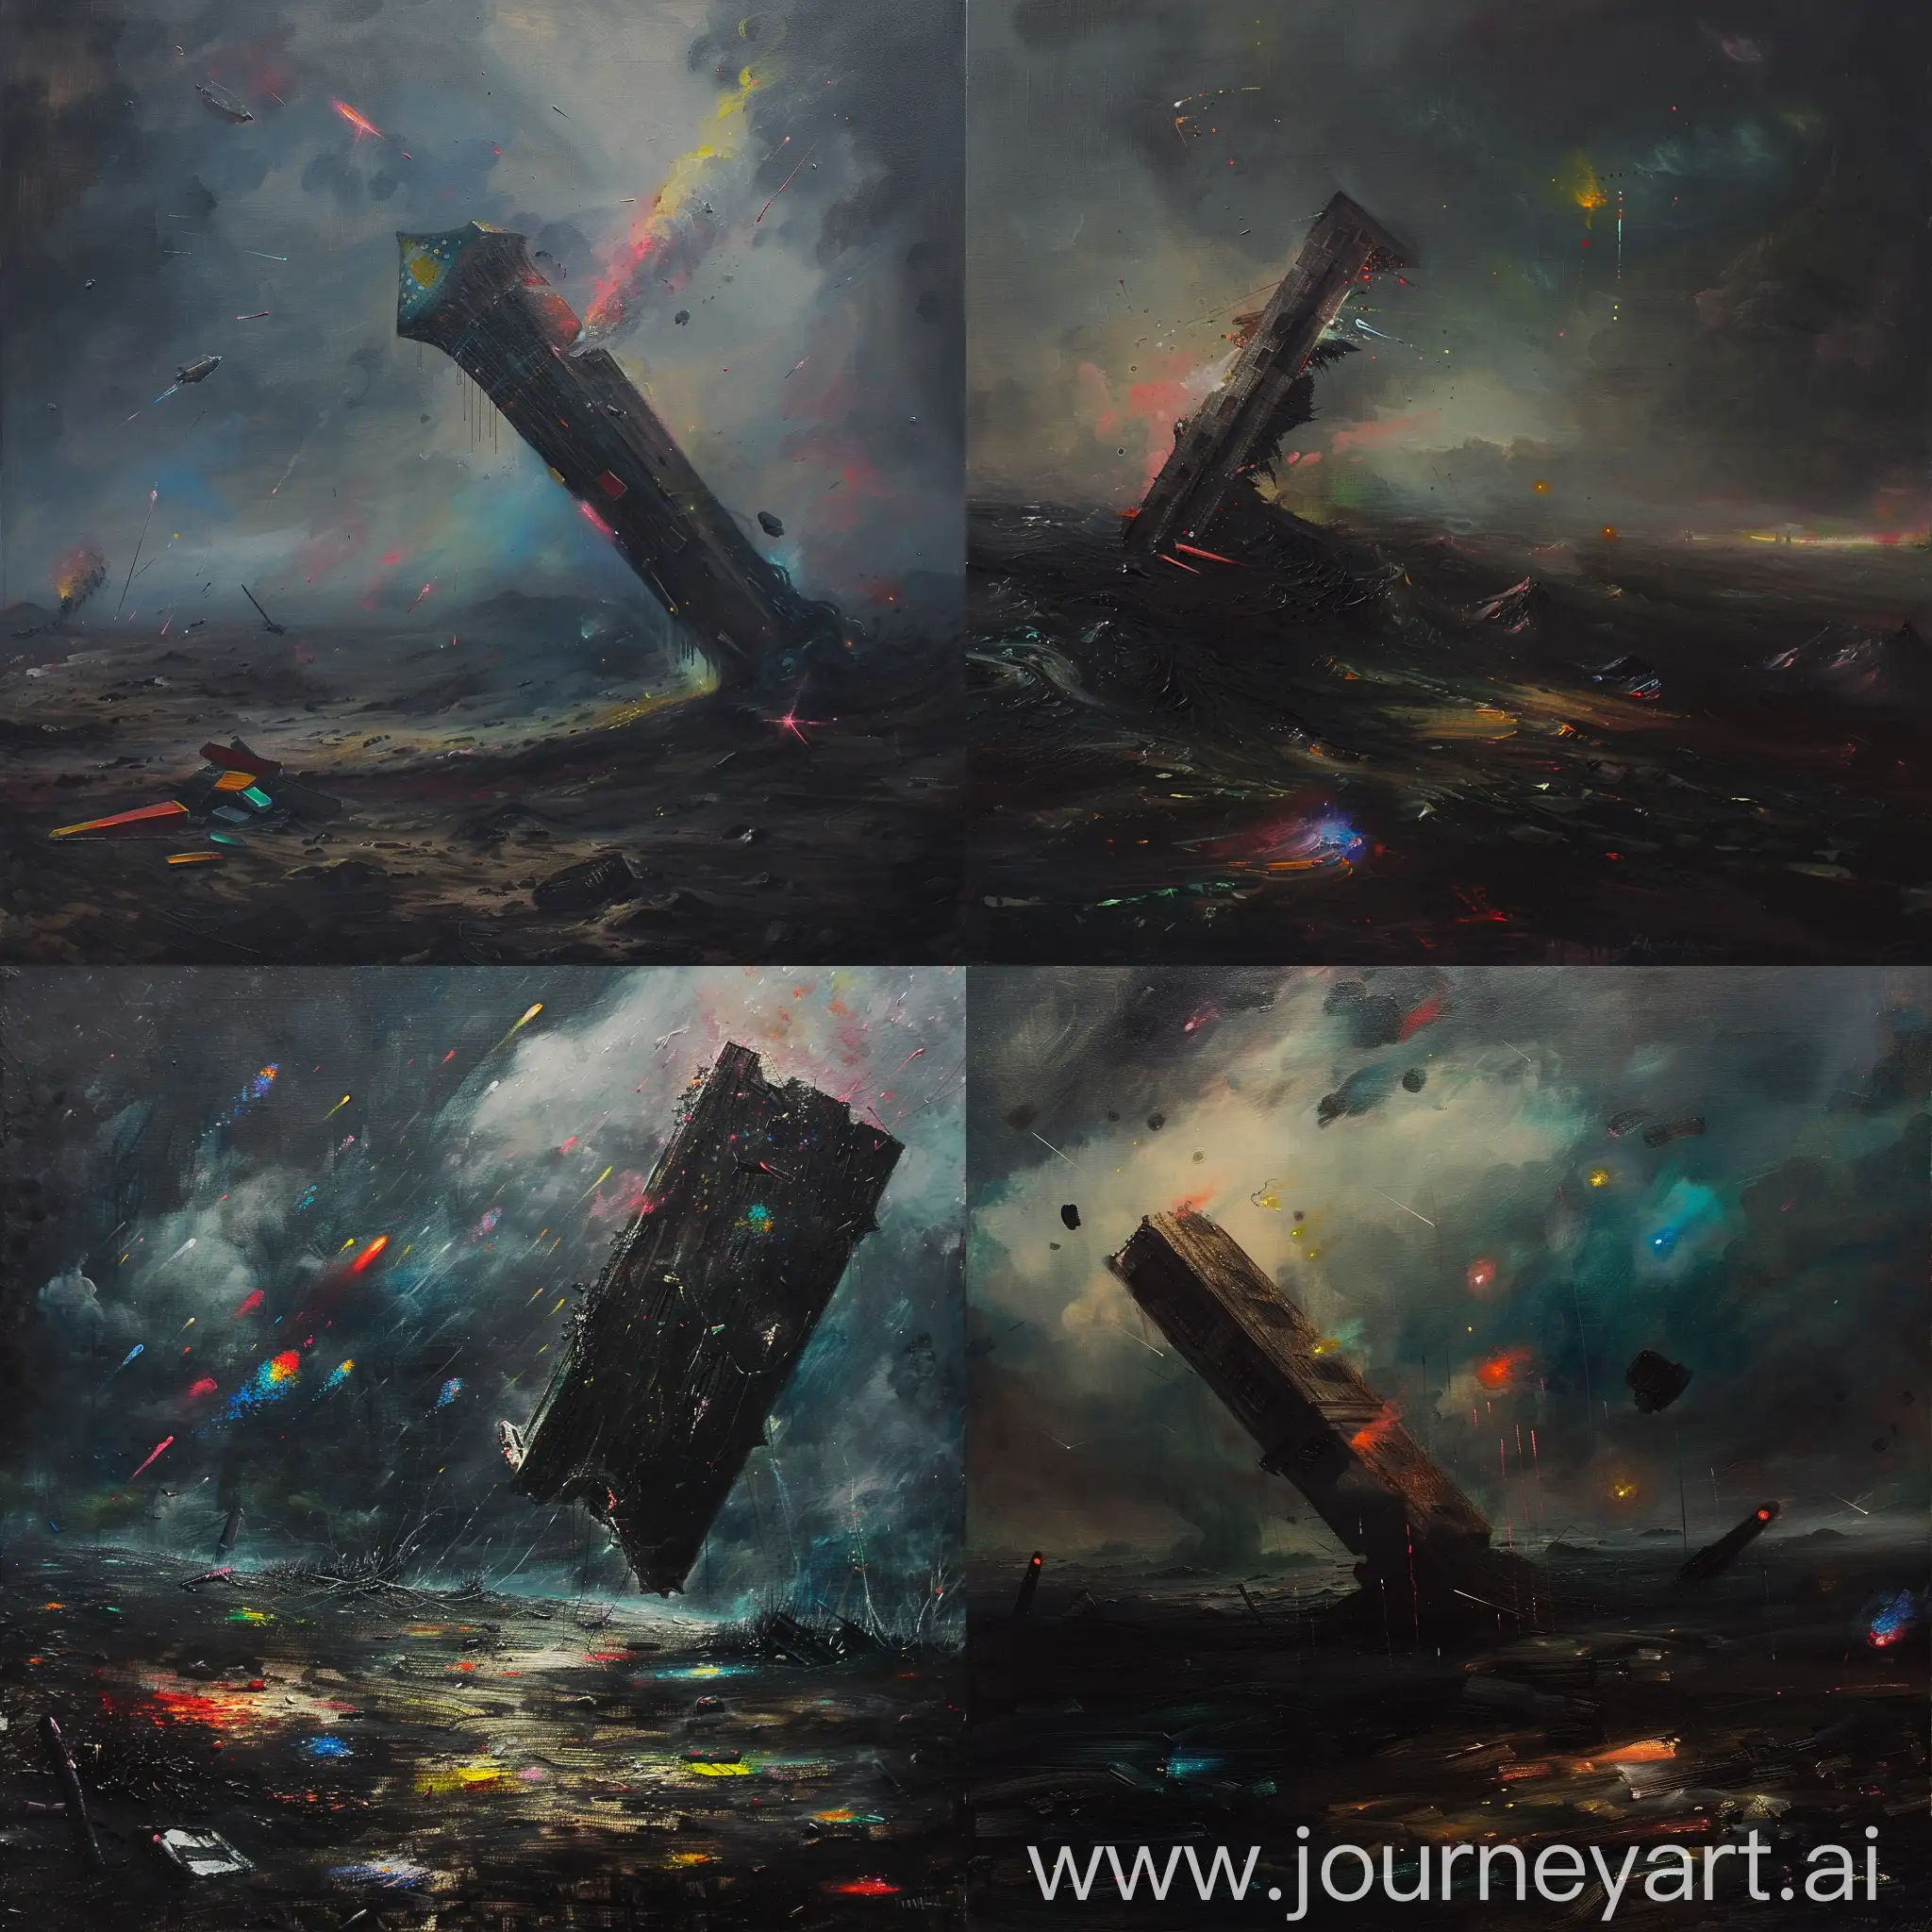 An oil painting of a stormy area, with dark ground, and an ominous floating tower, leaning sideways, with colorful shines in the air, dreamy, dreamland,